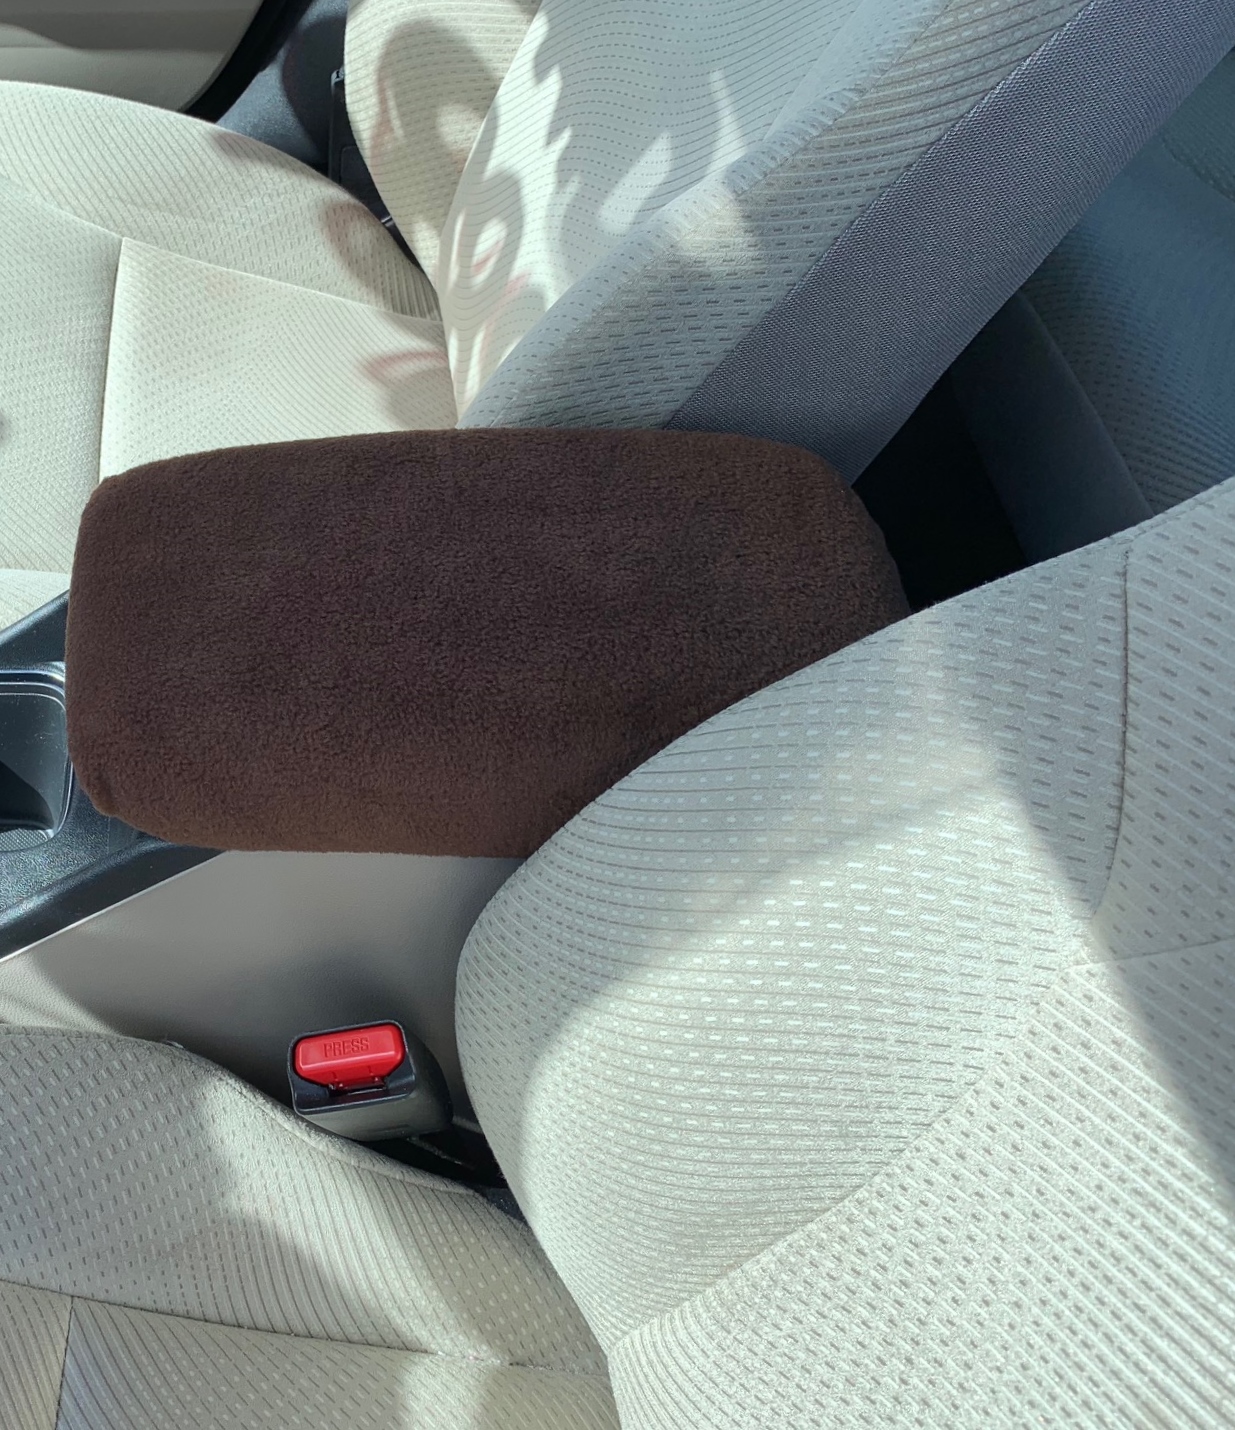 Buy Center Console Armrest Cover fits the Cadillac STS 2005-2011- Fleece Material